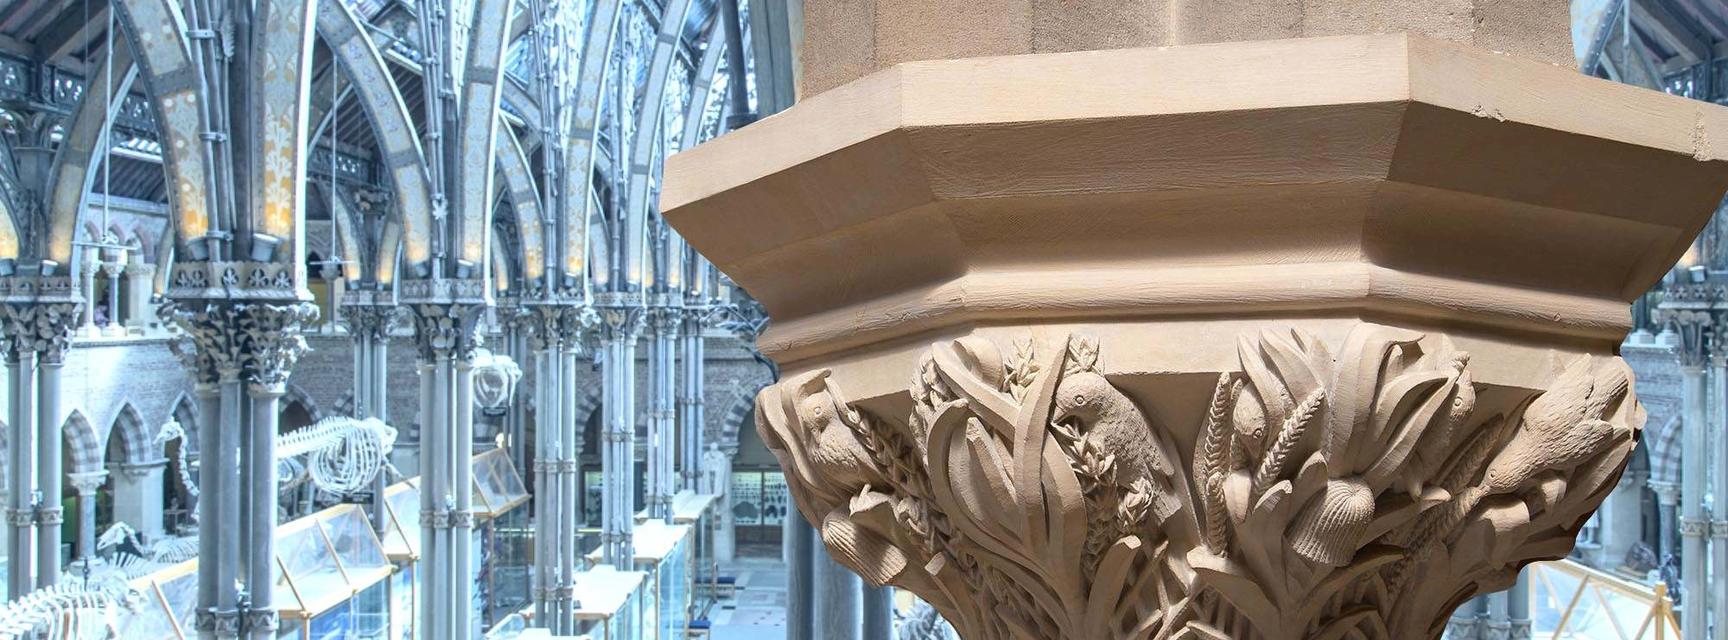 A carved column in the Museum featuring birds picking at grain